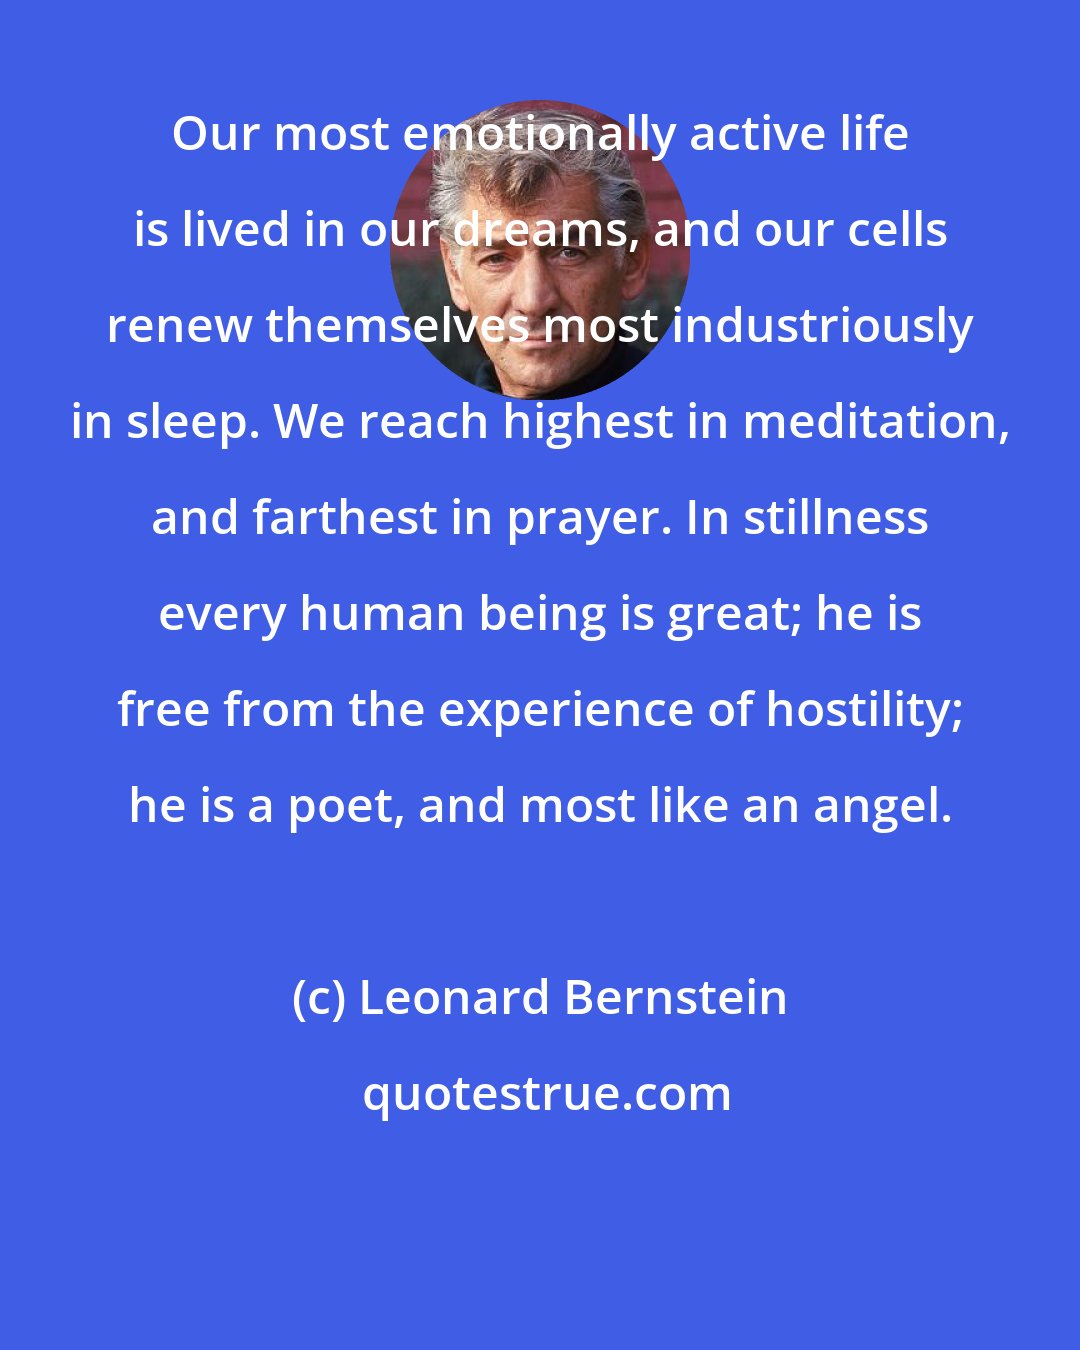 Leonard Bernstein: Our most emotionally active life is lived in our dreams, and our cells renew themselves most industriously in sleep. We reach highest in meditation, and farthest in prayer. In stillness every human being is great; he is free from the experience of hostility; he is a poet, and most like an angel.